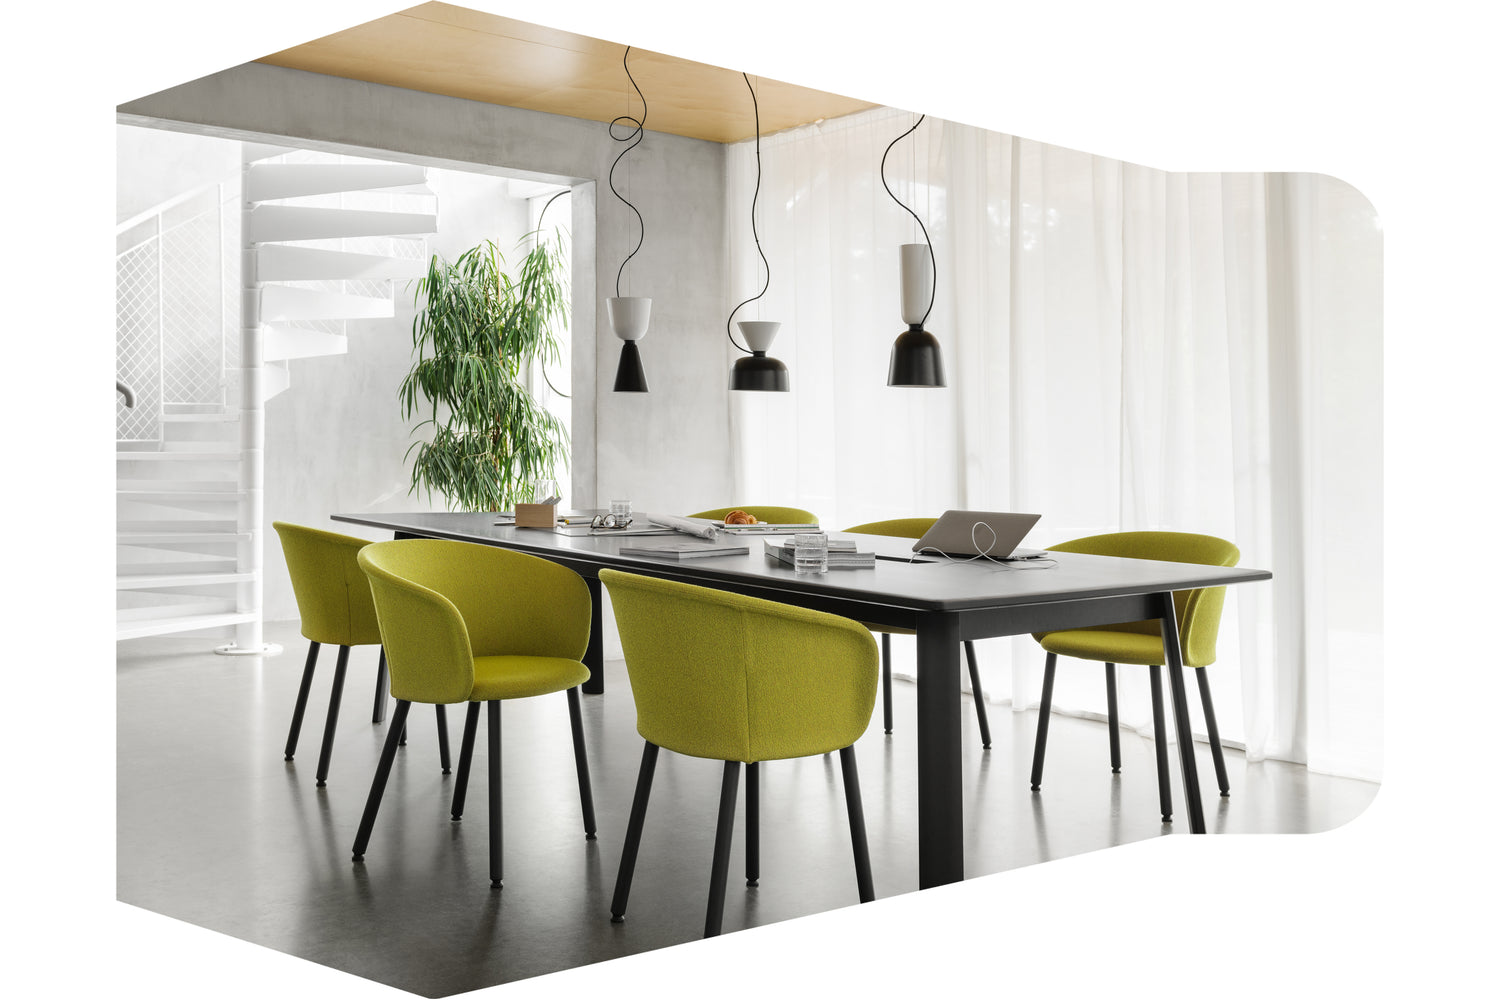 Hem - a dining scene featuring Kendo Chair, Alphabeta Pendant Light Trio, and Alle Table in Black.